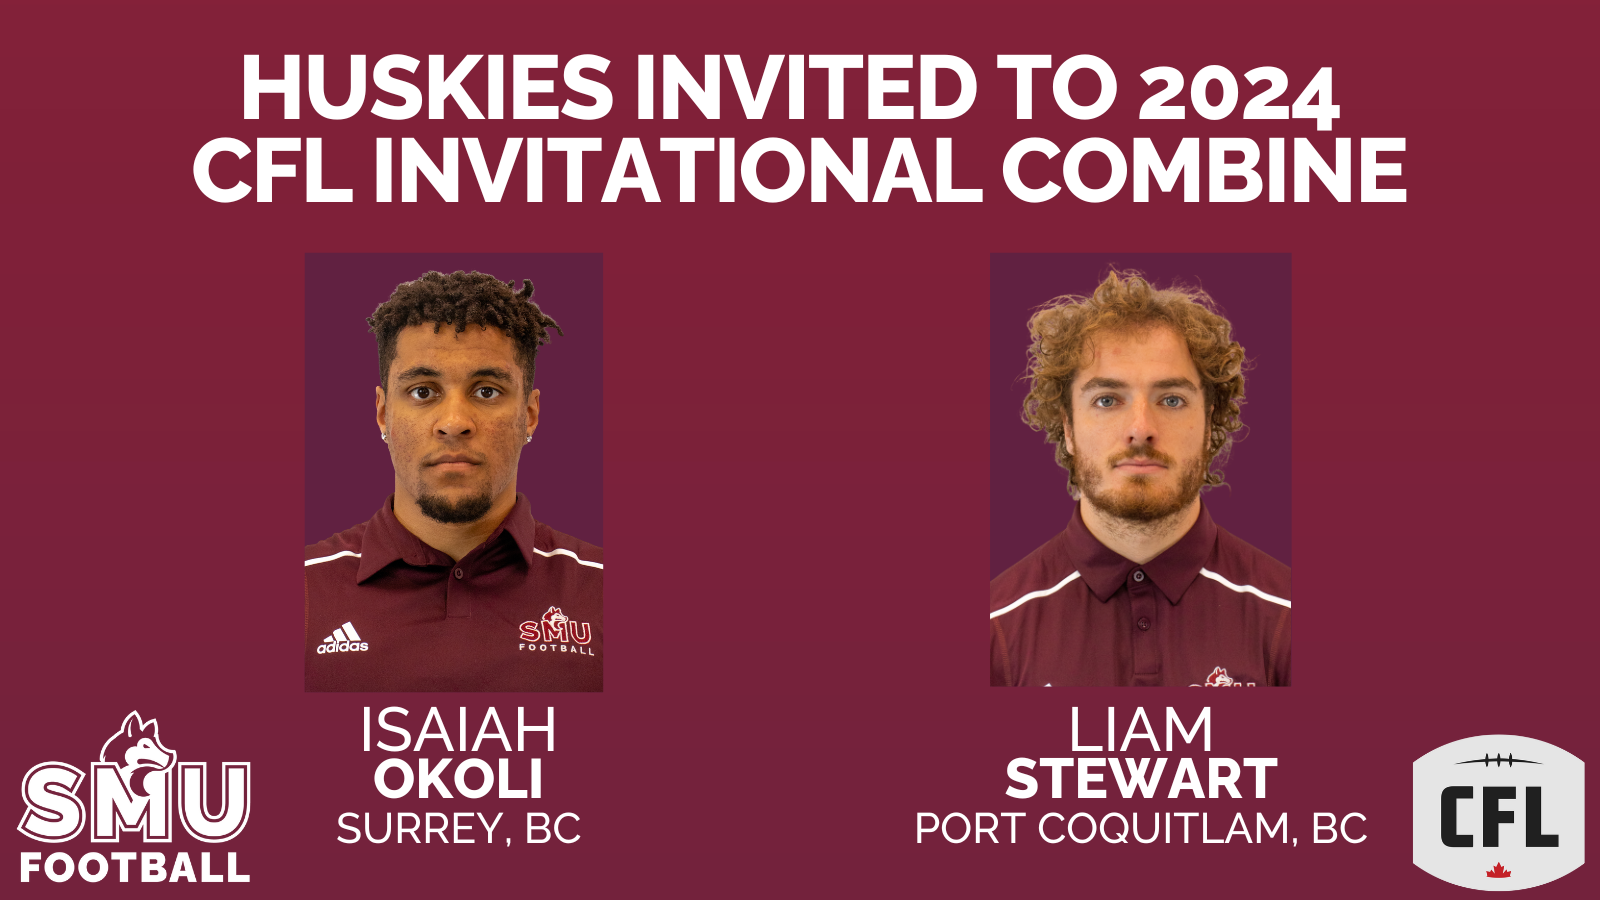 Okoli, Stewart selected to participate in upcoming CFL Invitational Combine